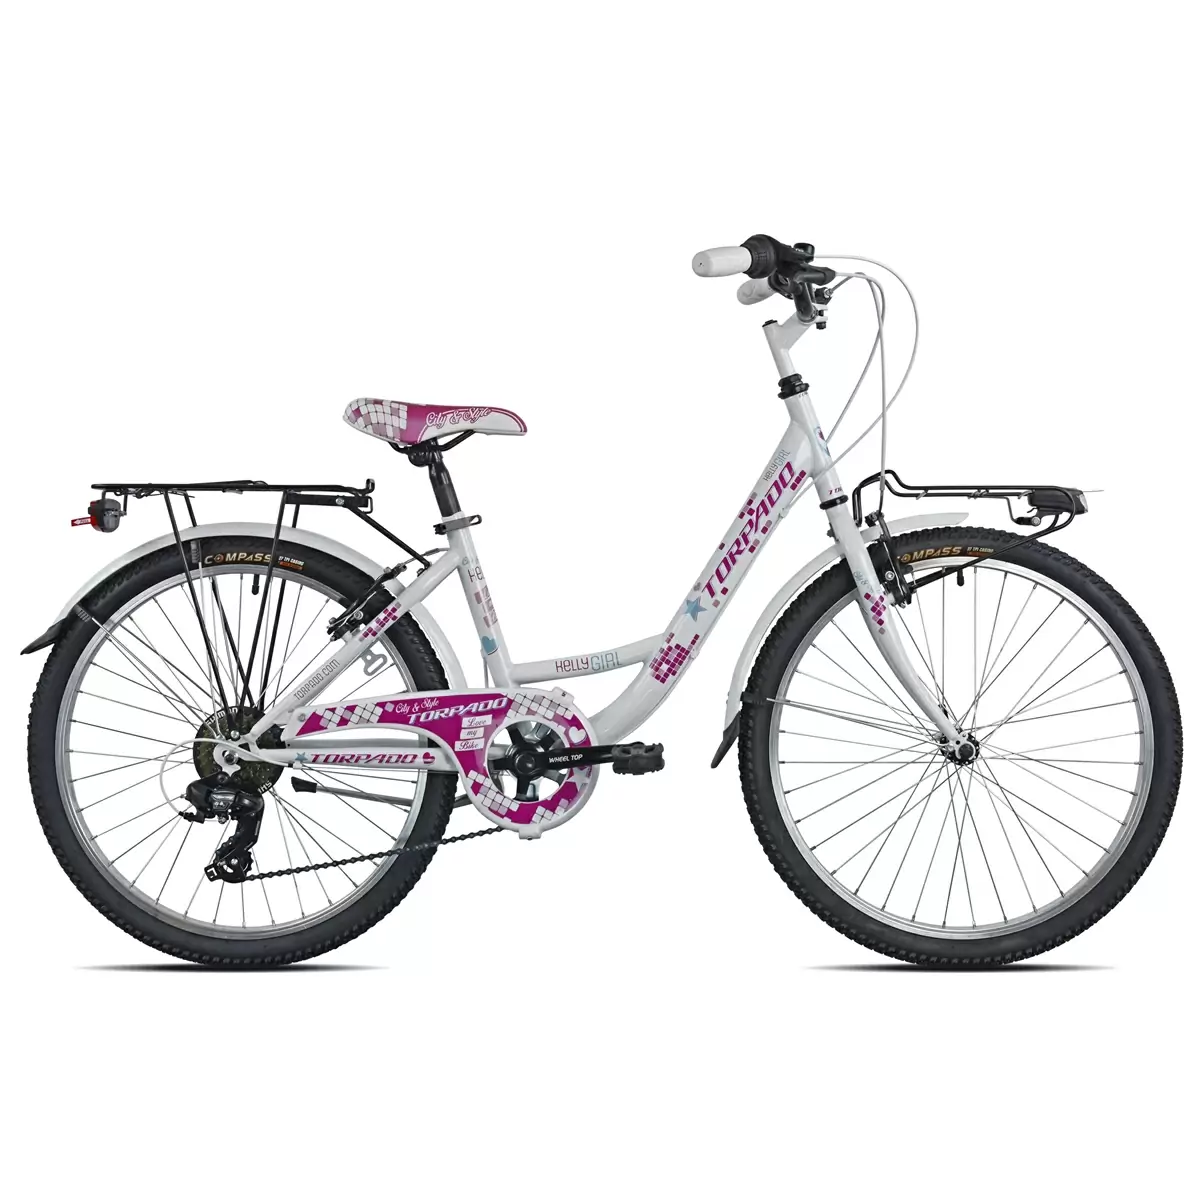 T611 Kelly 24'' Fille 9-11 Ans 6s Blanc/Magenta - image